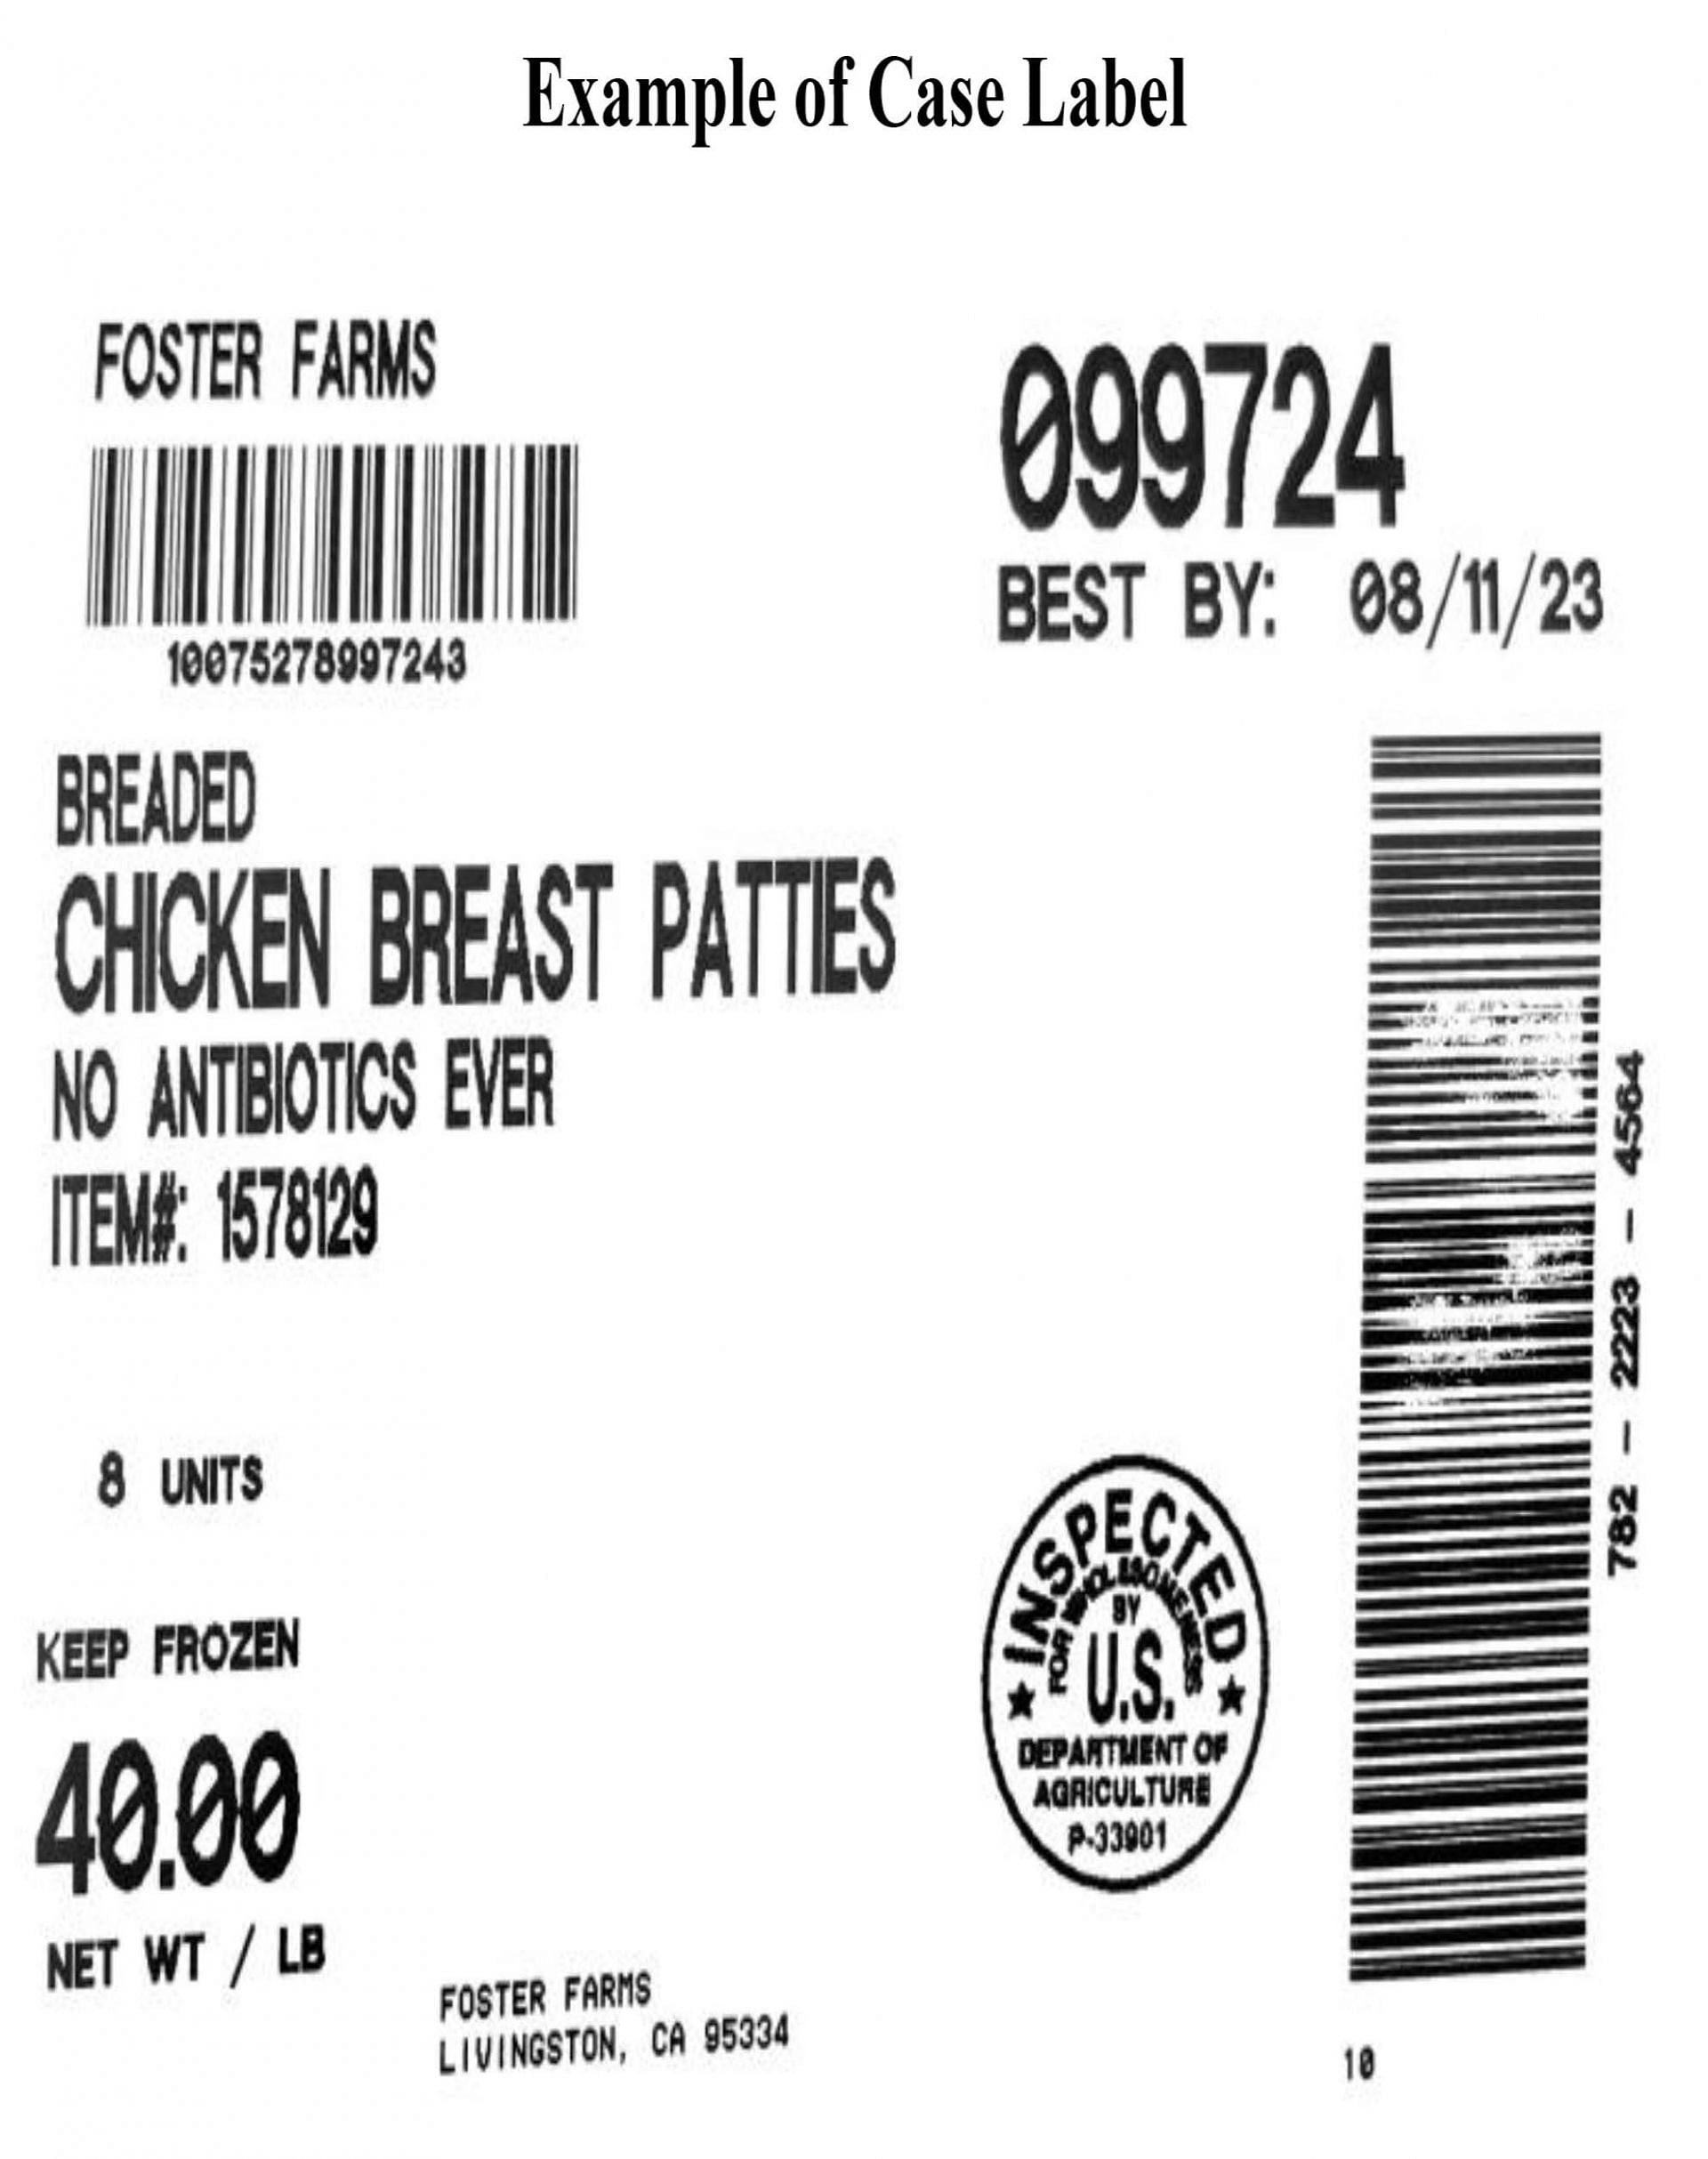 Example of a Case Label as given by FSIS (Image via FSIS)